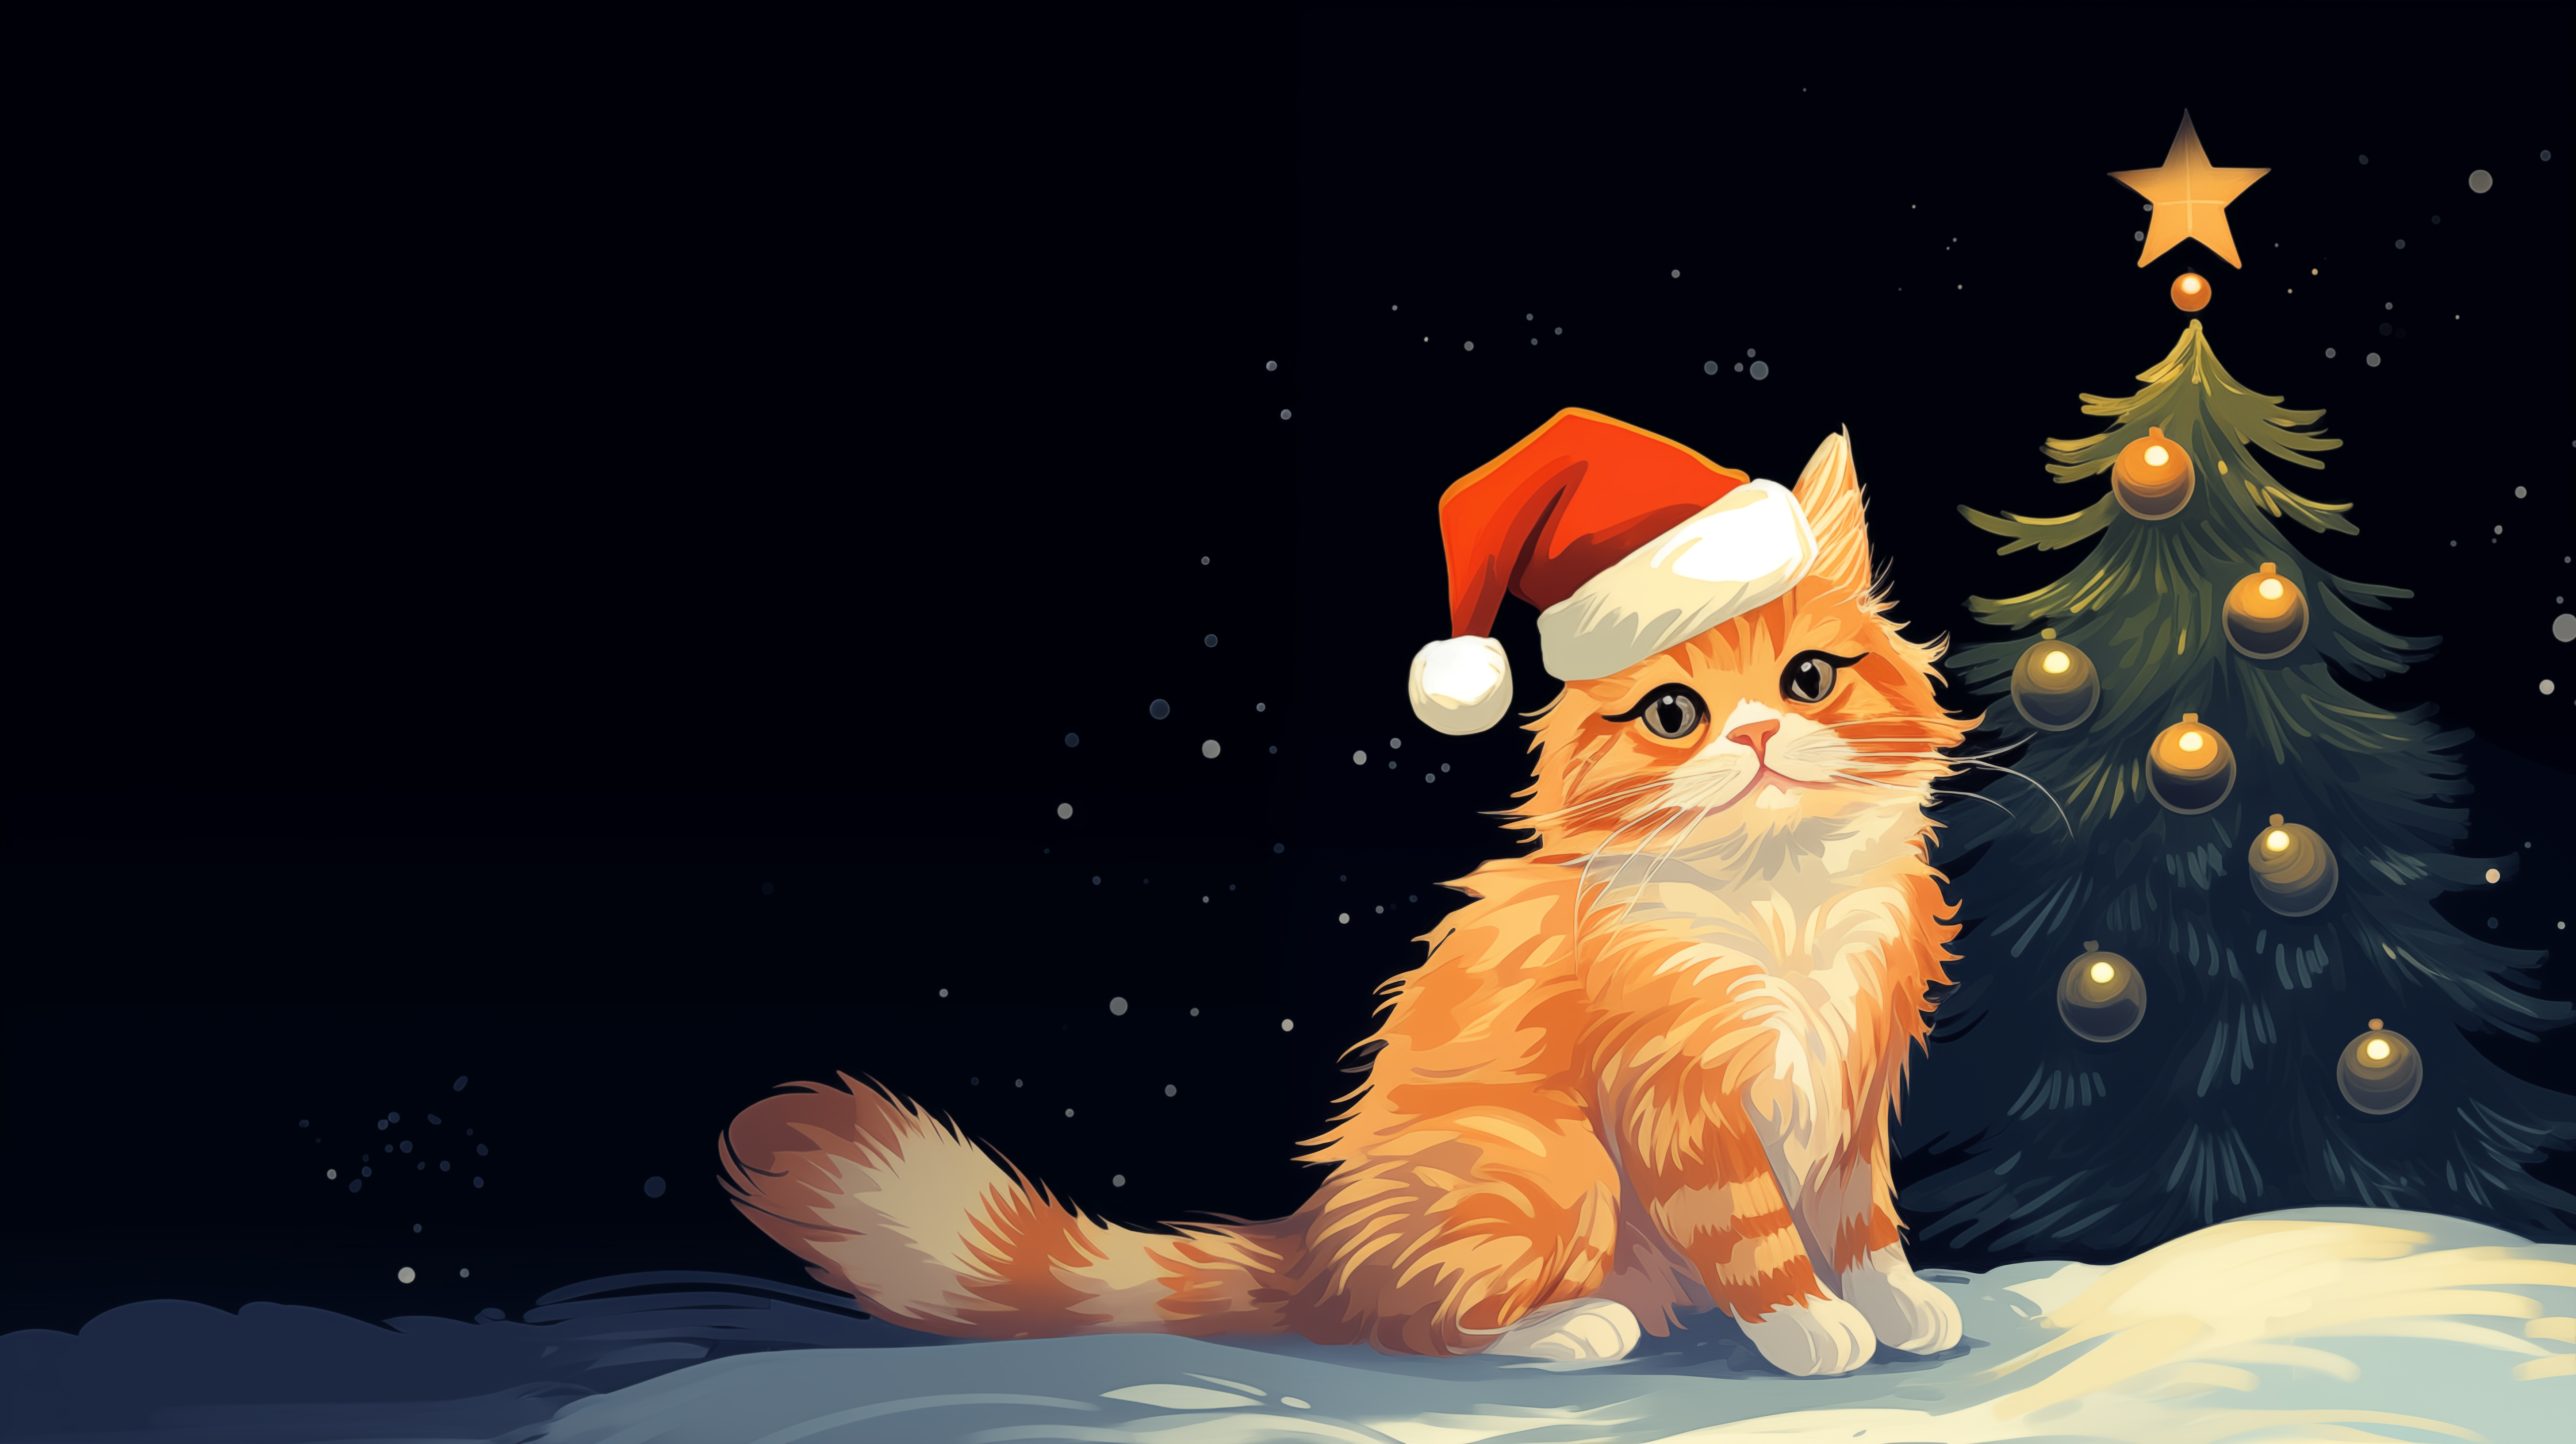 Adorable orange cat with a Santa hat sitting beside a Christmas tree, perfect for festive HD desktop wallpaper and background.